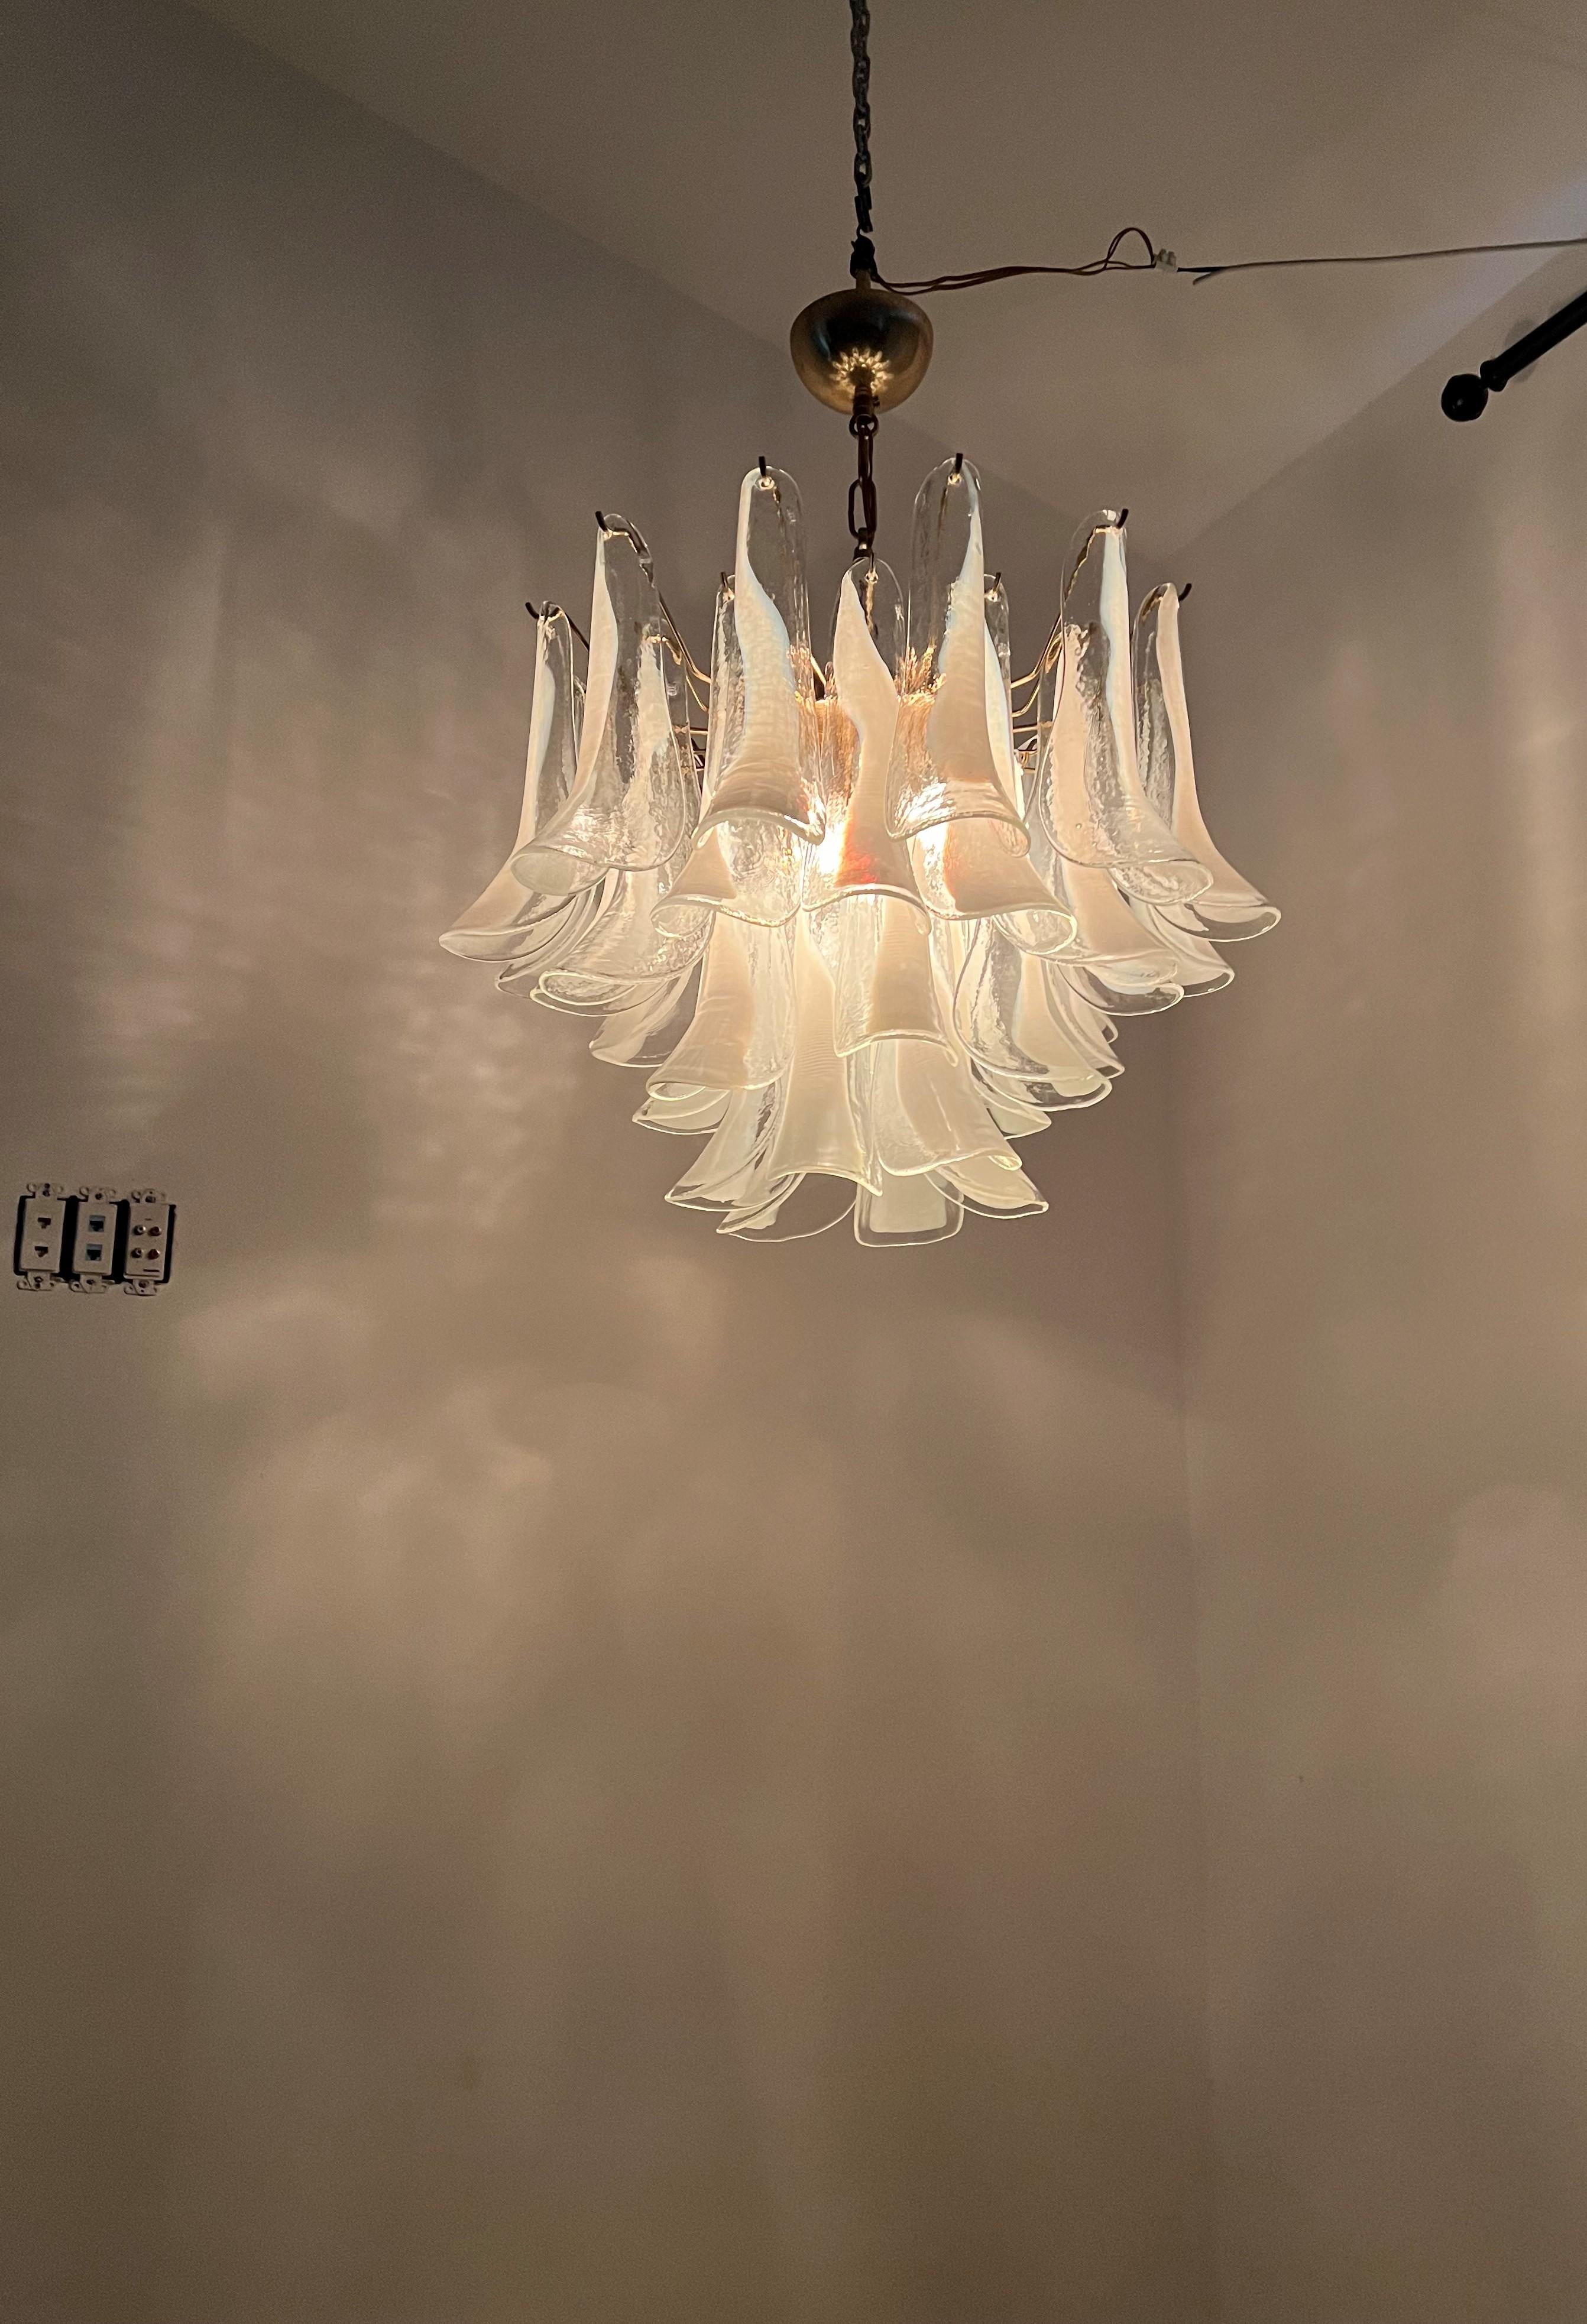 Two Identical Signed Mid-Century Modern Chandeliers, La Murrina in Murano Glass For Sale 10